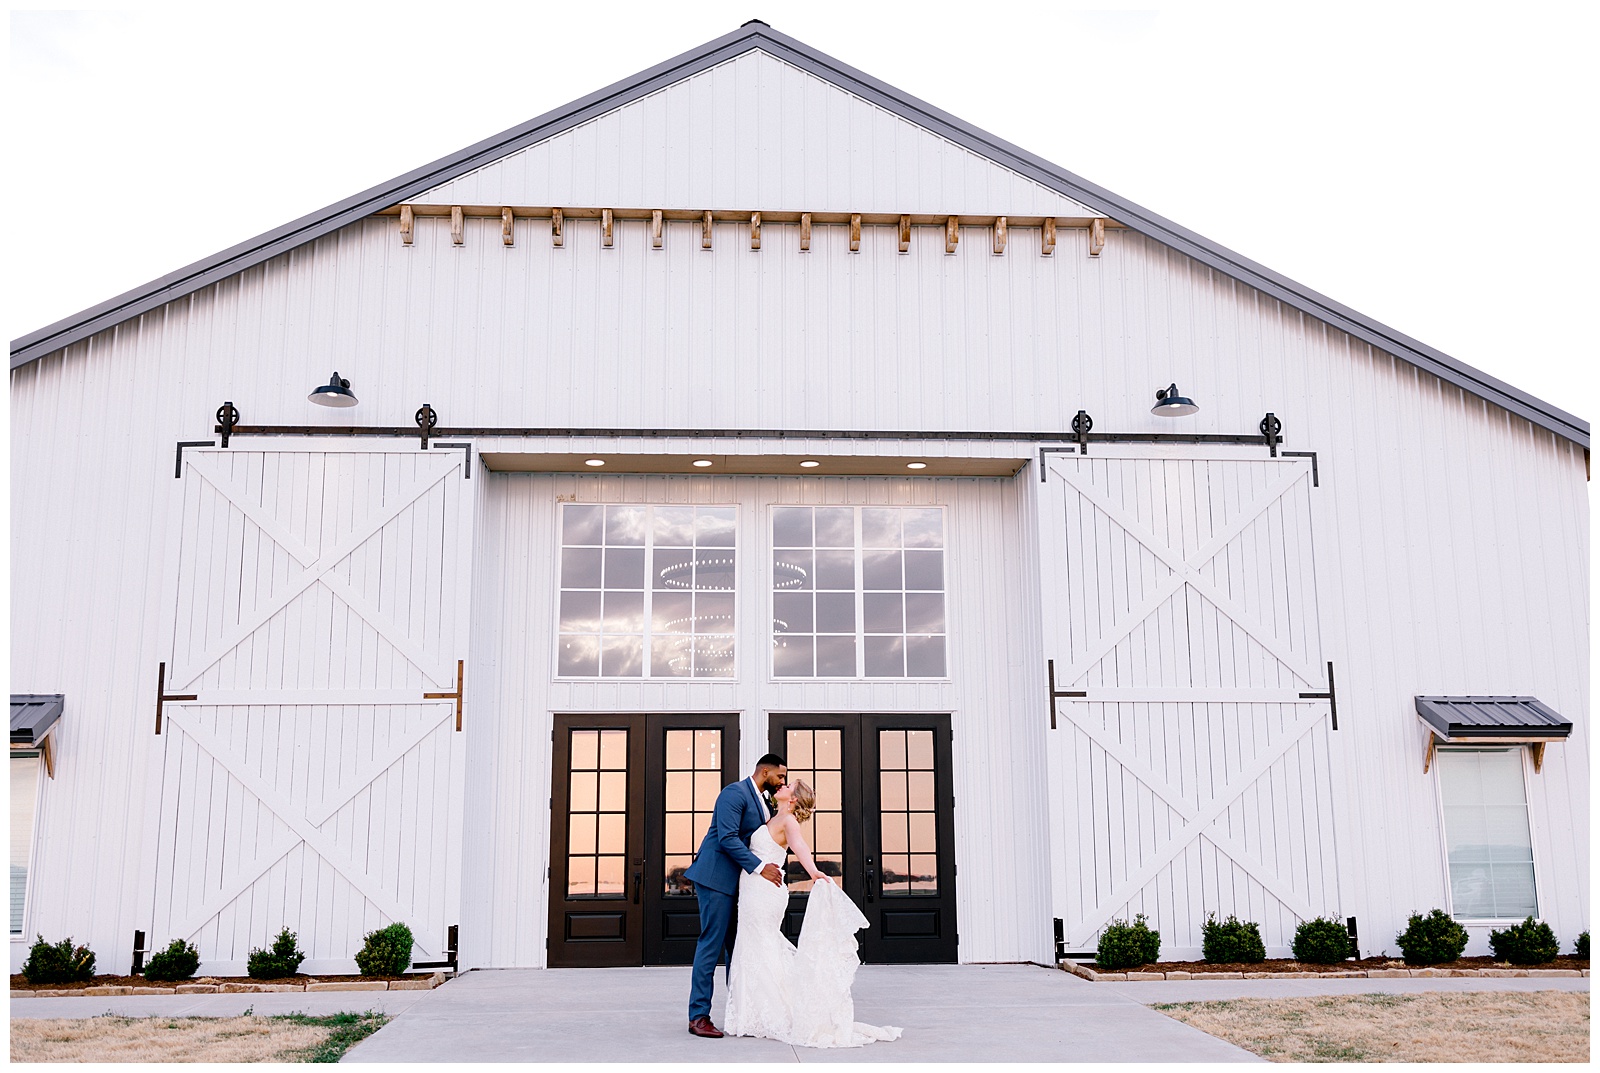 Sunset wedding photo at the barn at grace hill with a couple in wedding attire standing on in front of the barn.